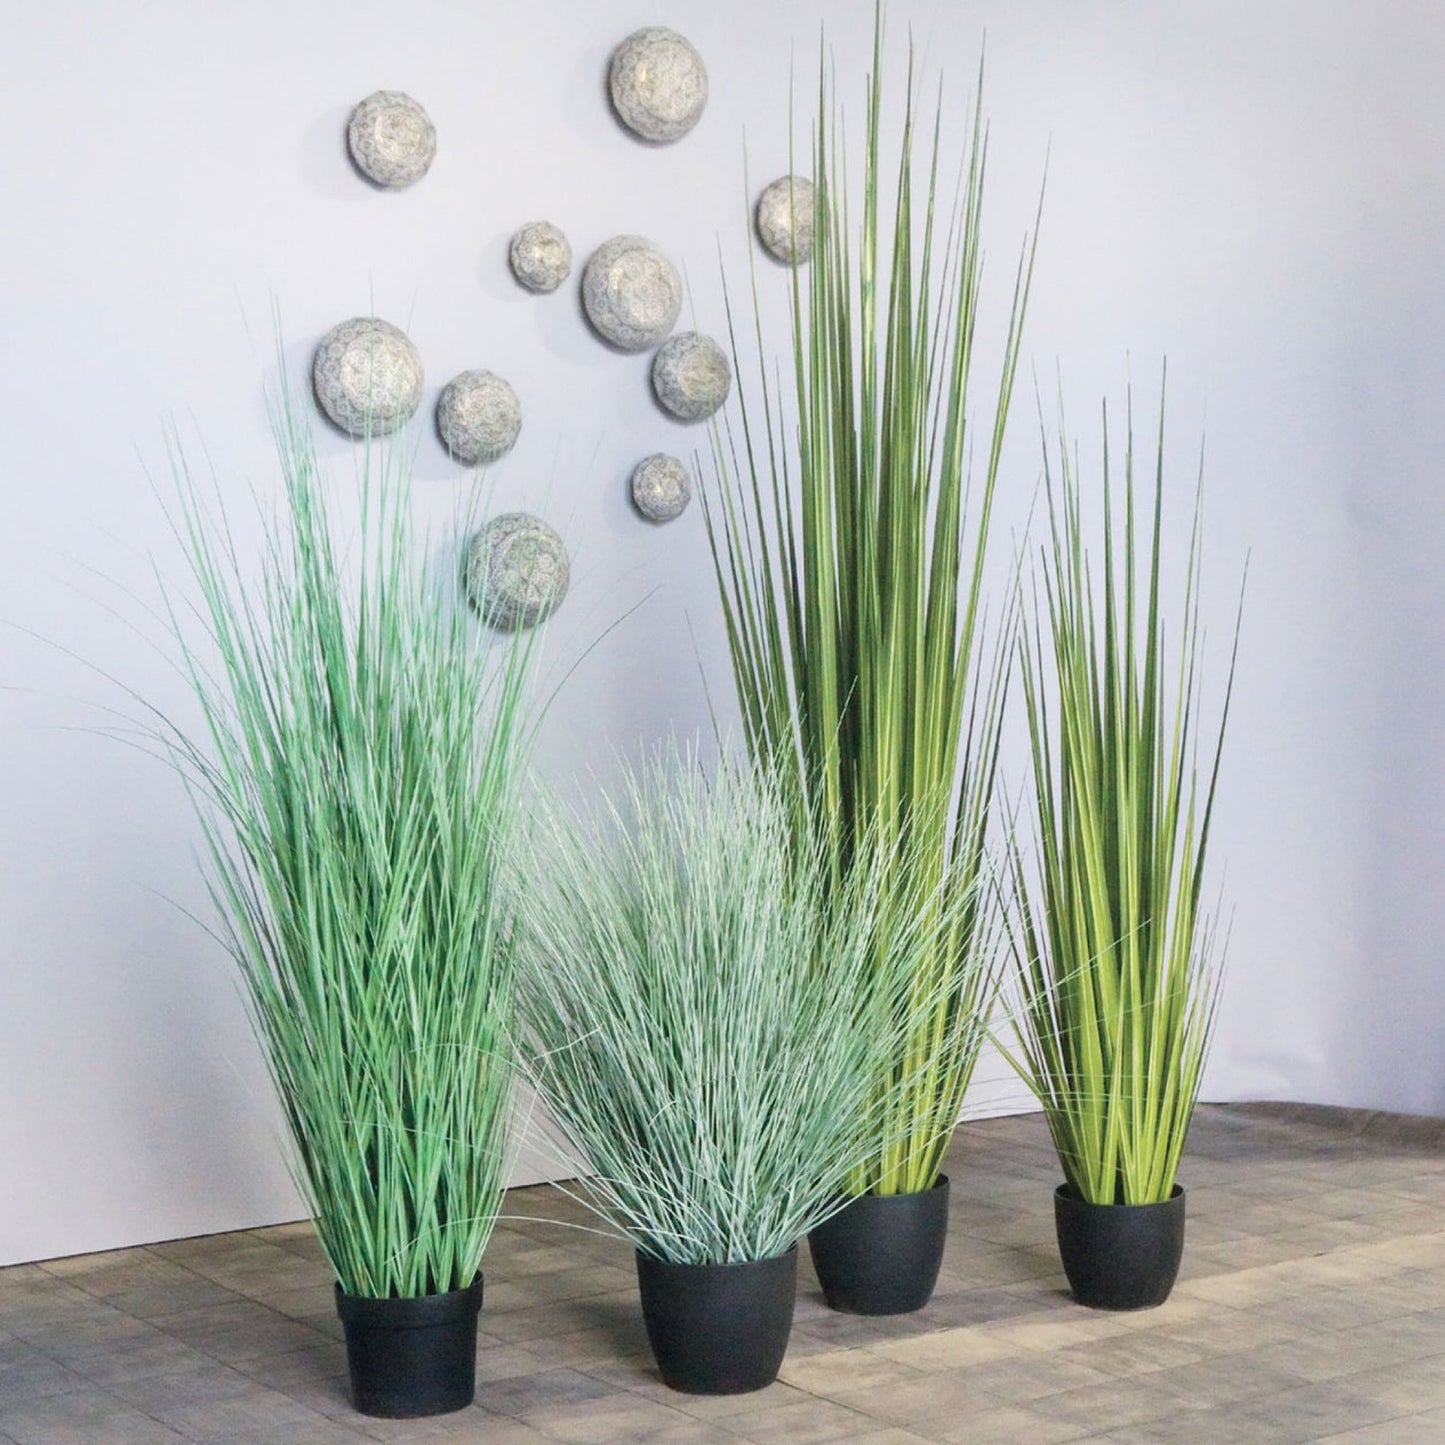 GRASS: CENTURY 60"H, POTTED